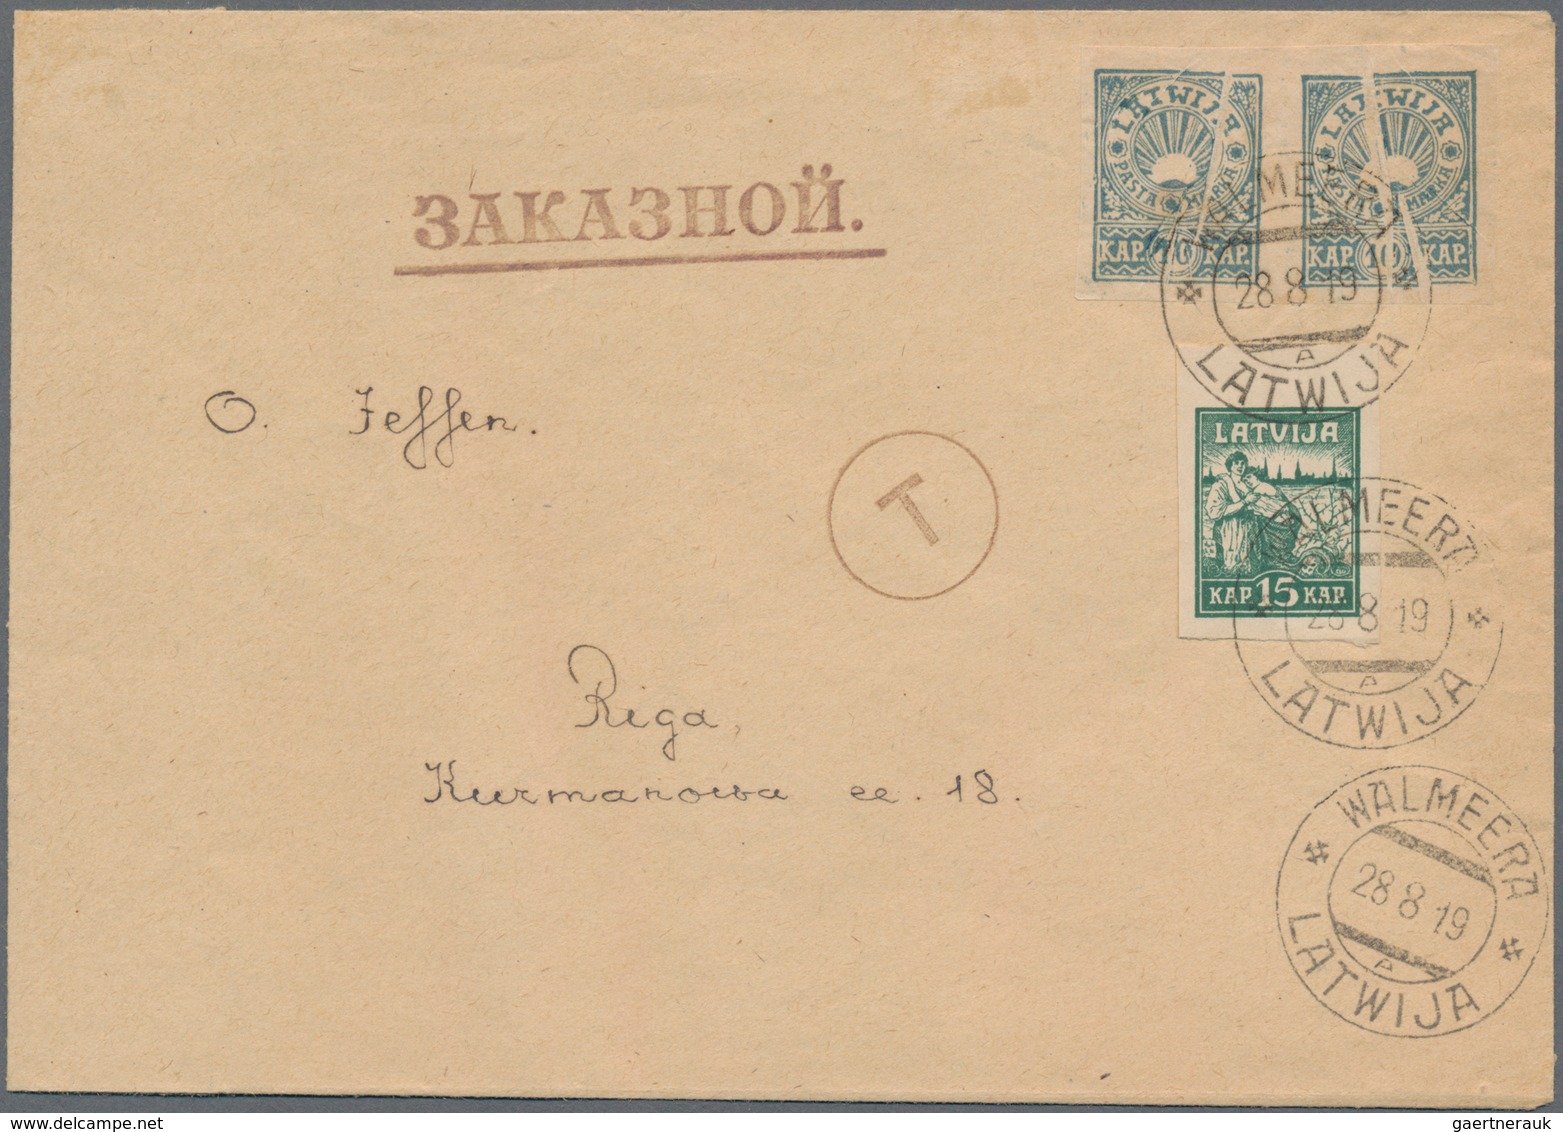 Lettland: 1919 - 1940, Lot Of 19 Covers, While Letters, Postal Stationeries And Postcards With Censo - Letland